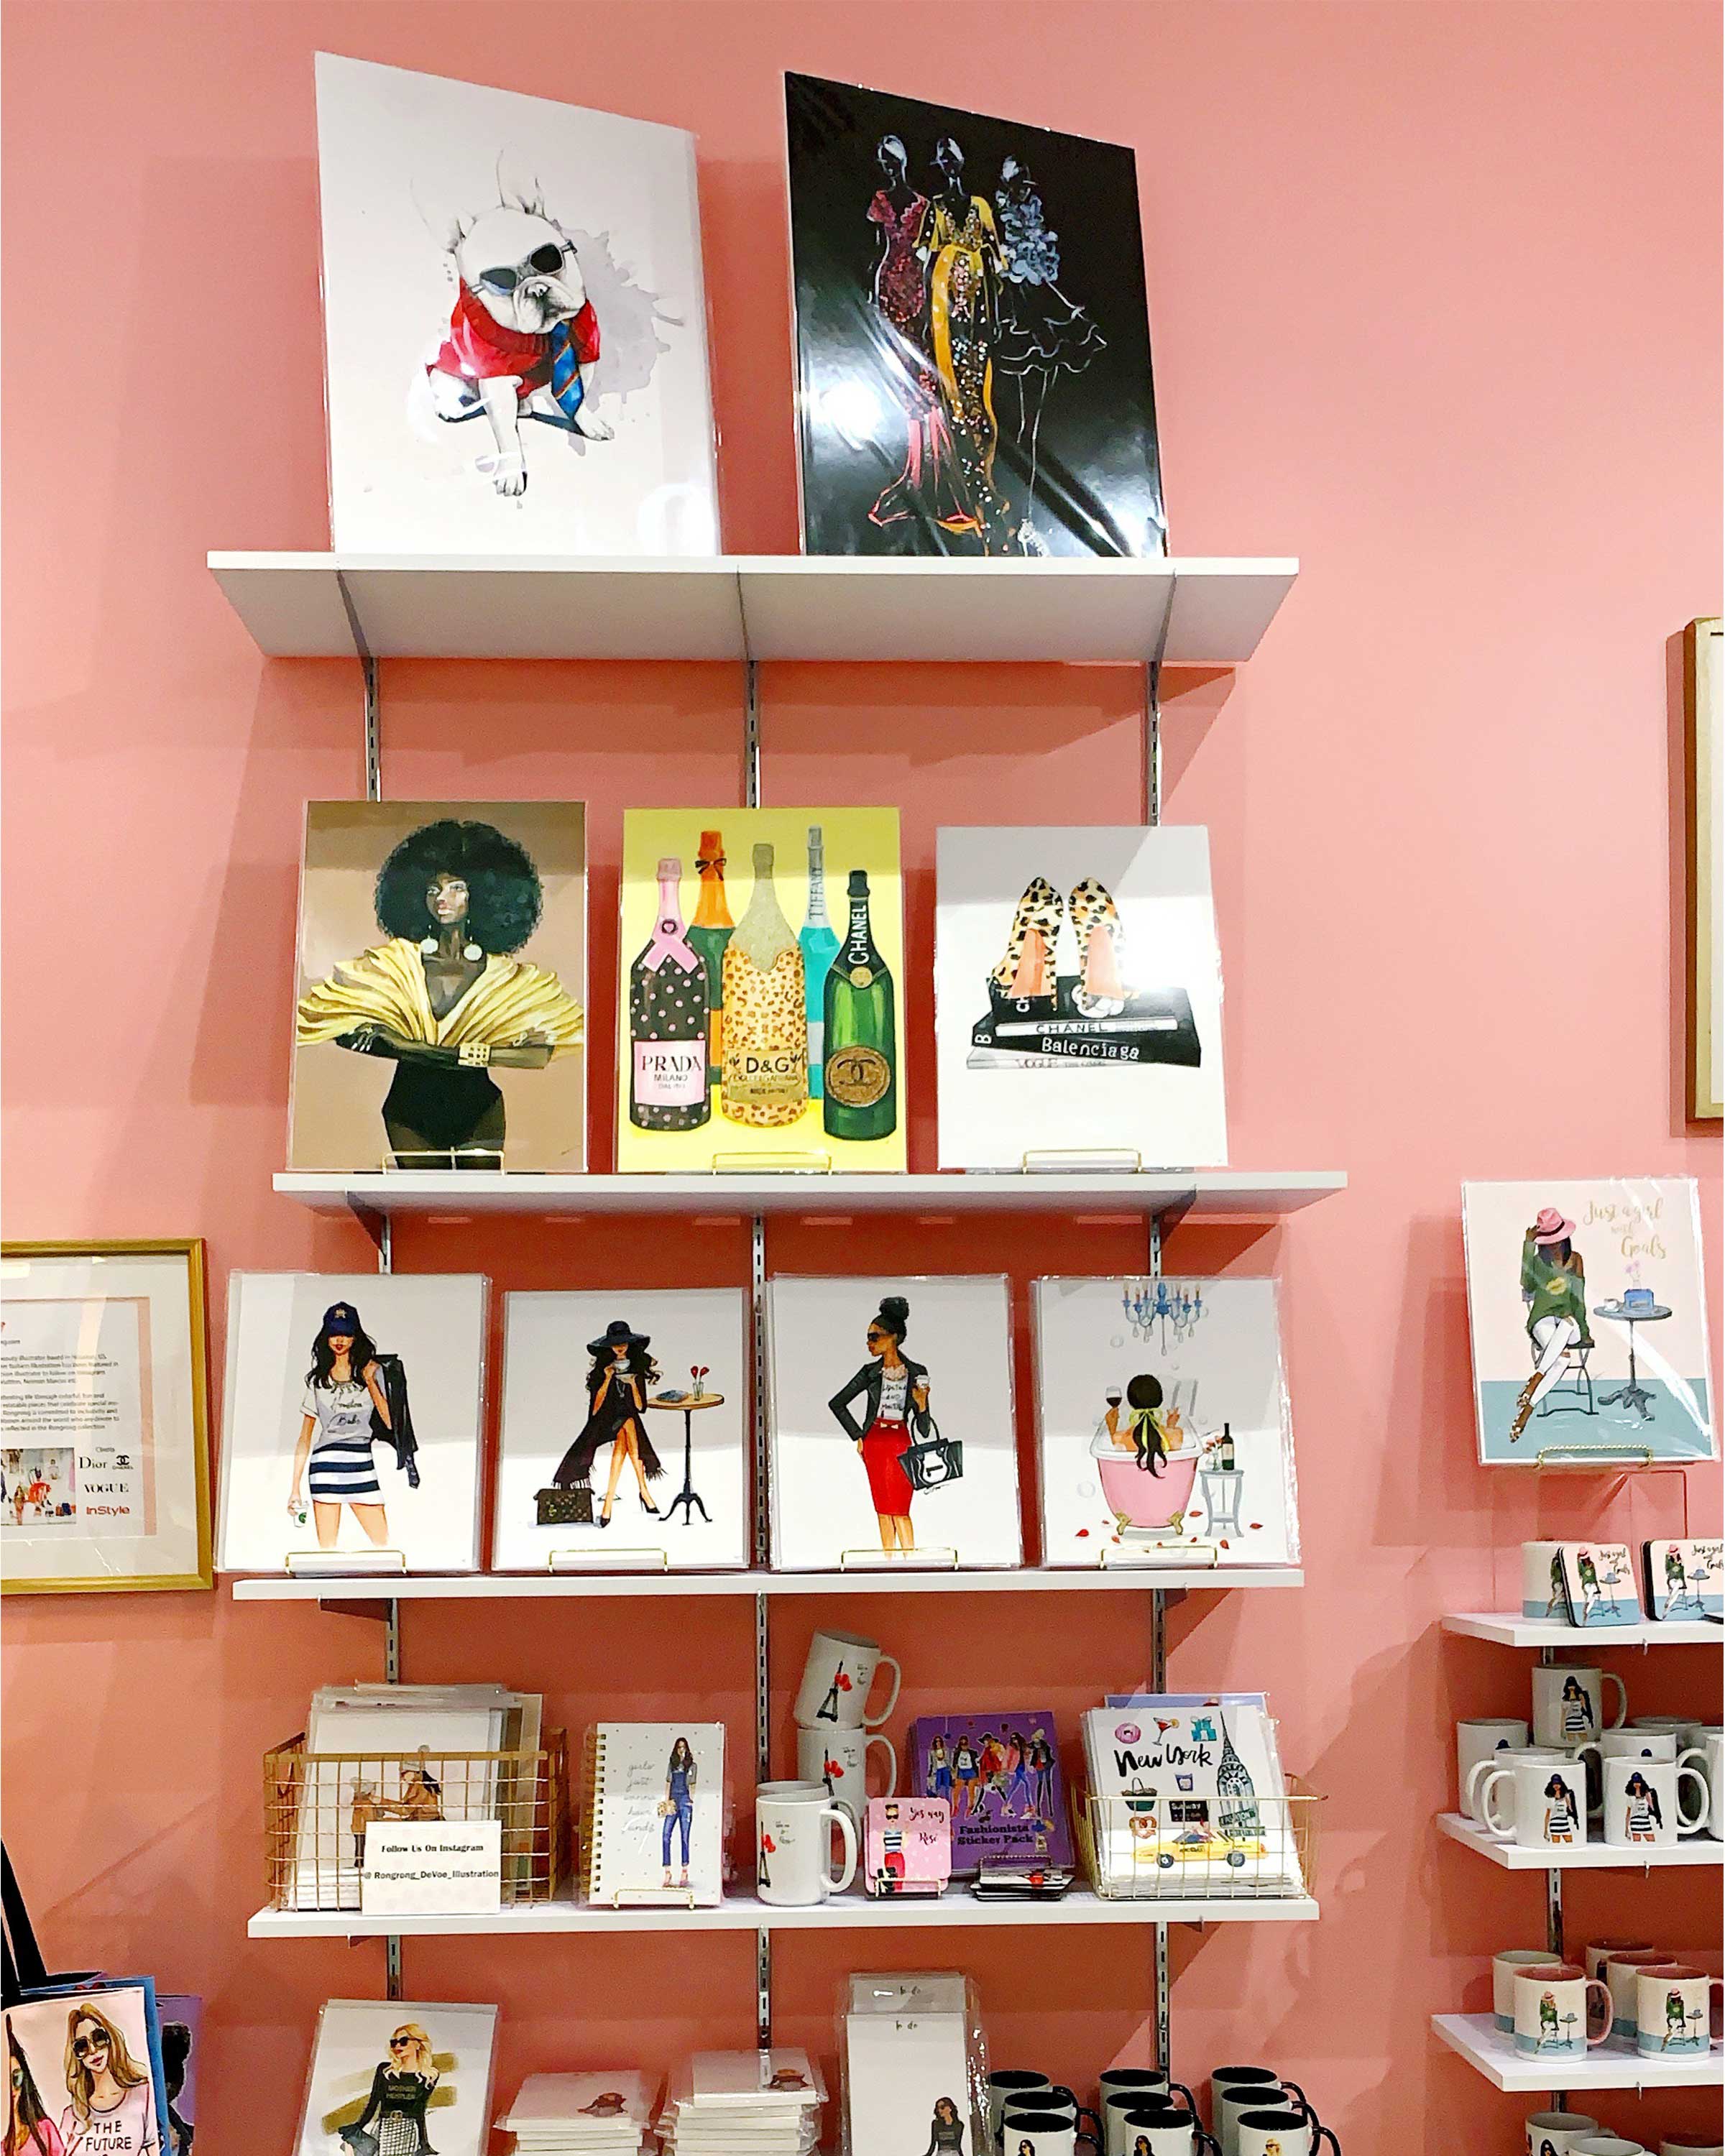 Rongrong DeVoe fashion illustration and gift shop in houston galleria